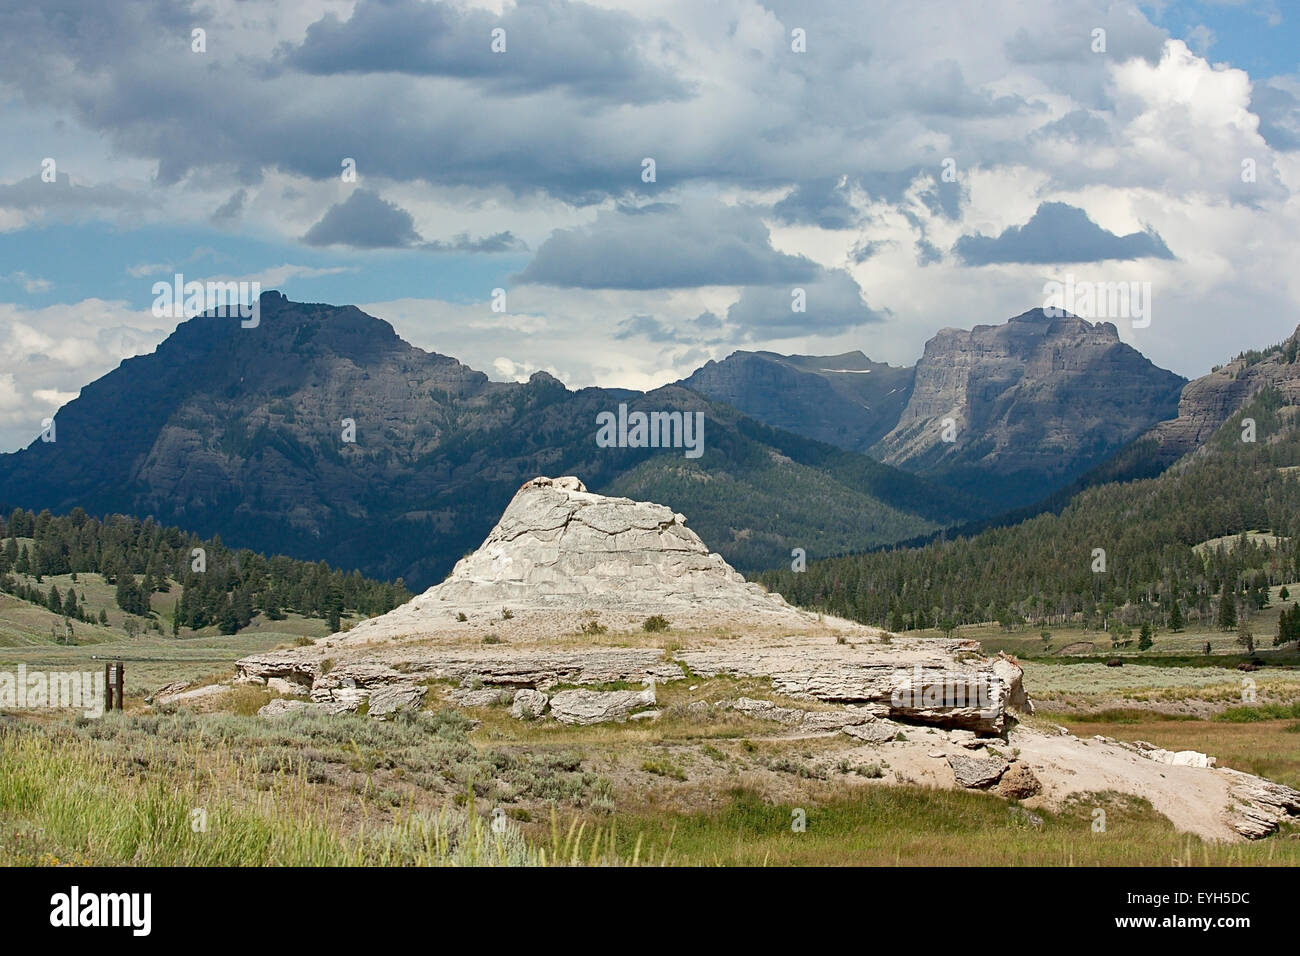 Soda Butte in the Lamar Valley, Yellowstone National Park Stock Photo